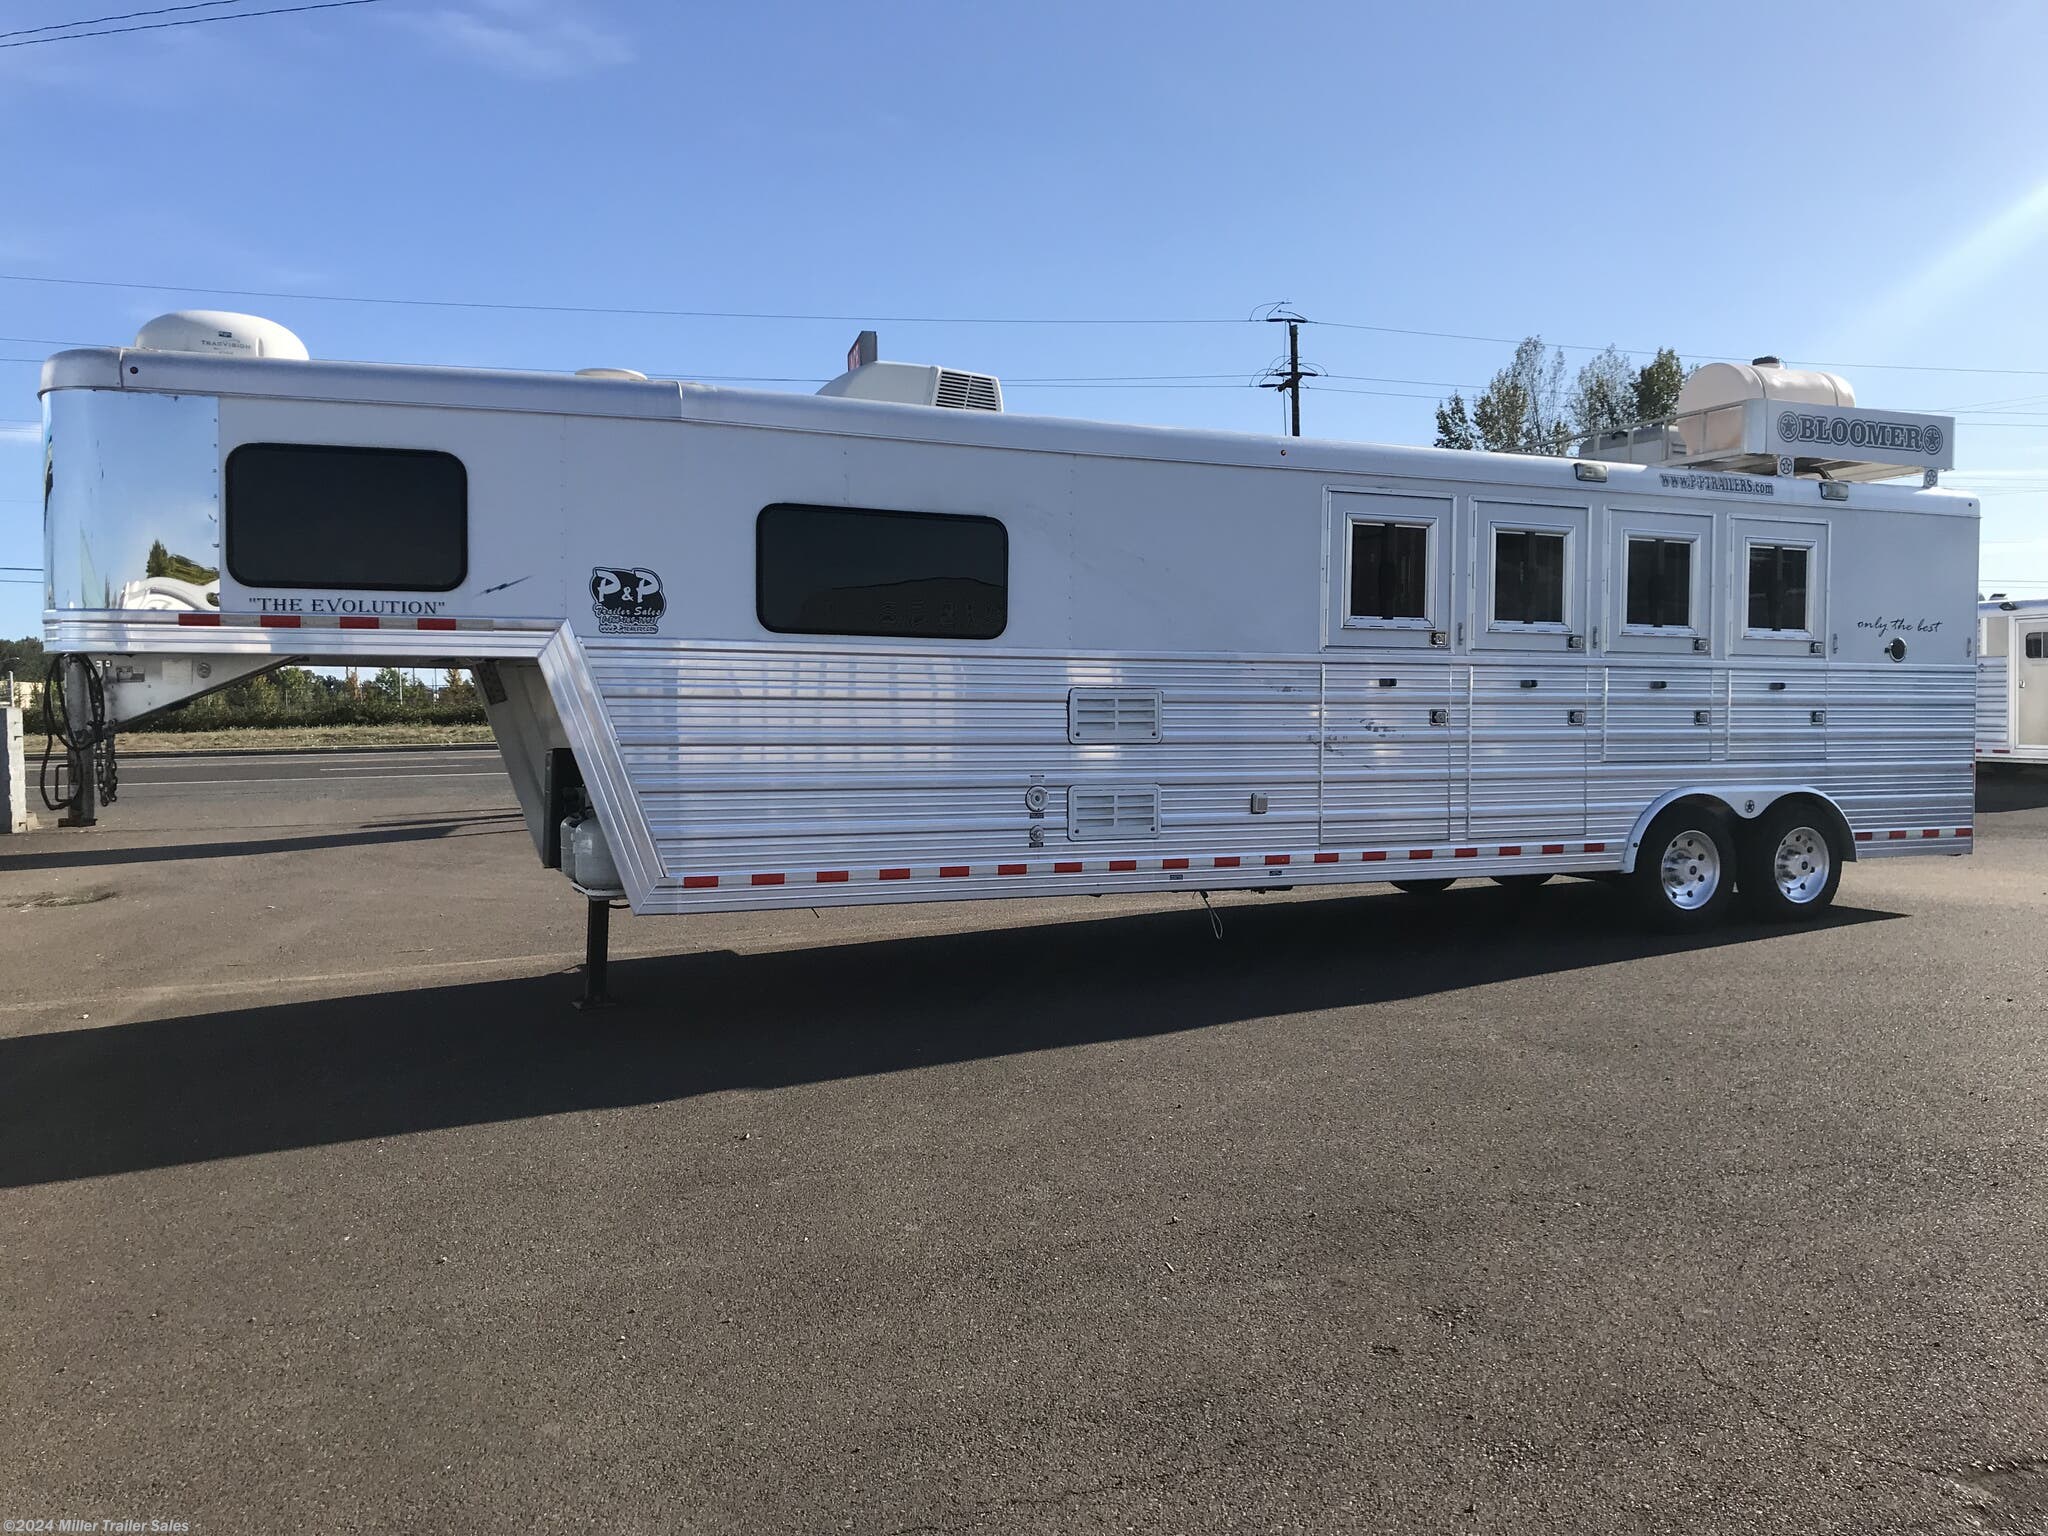 used horse trailers for sale